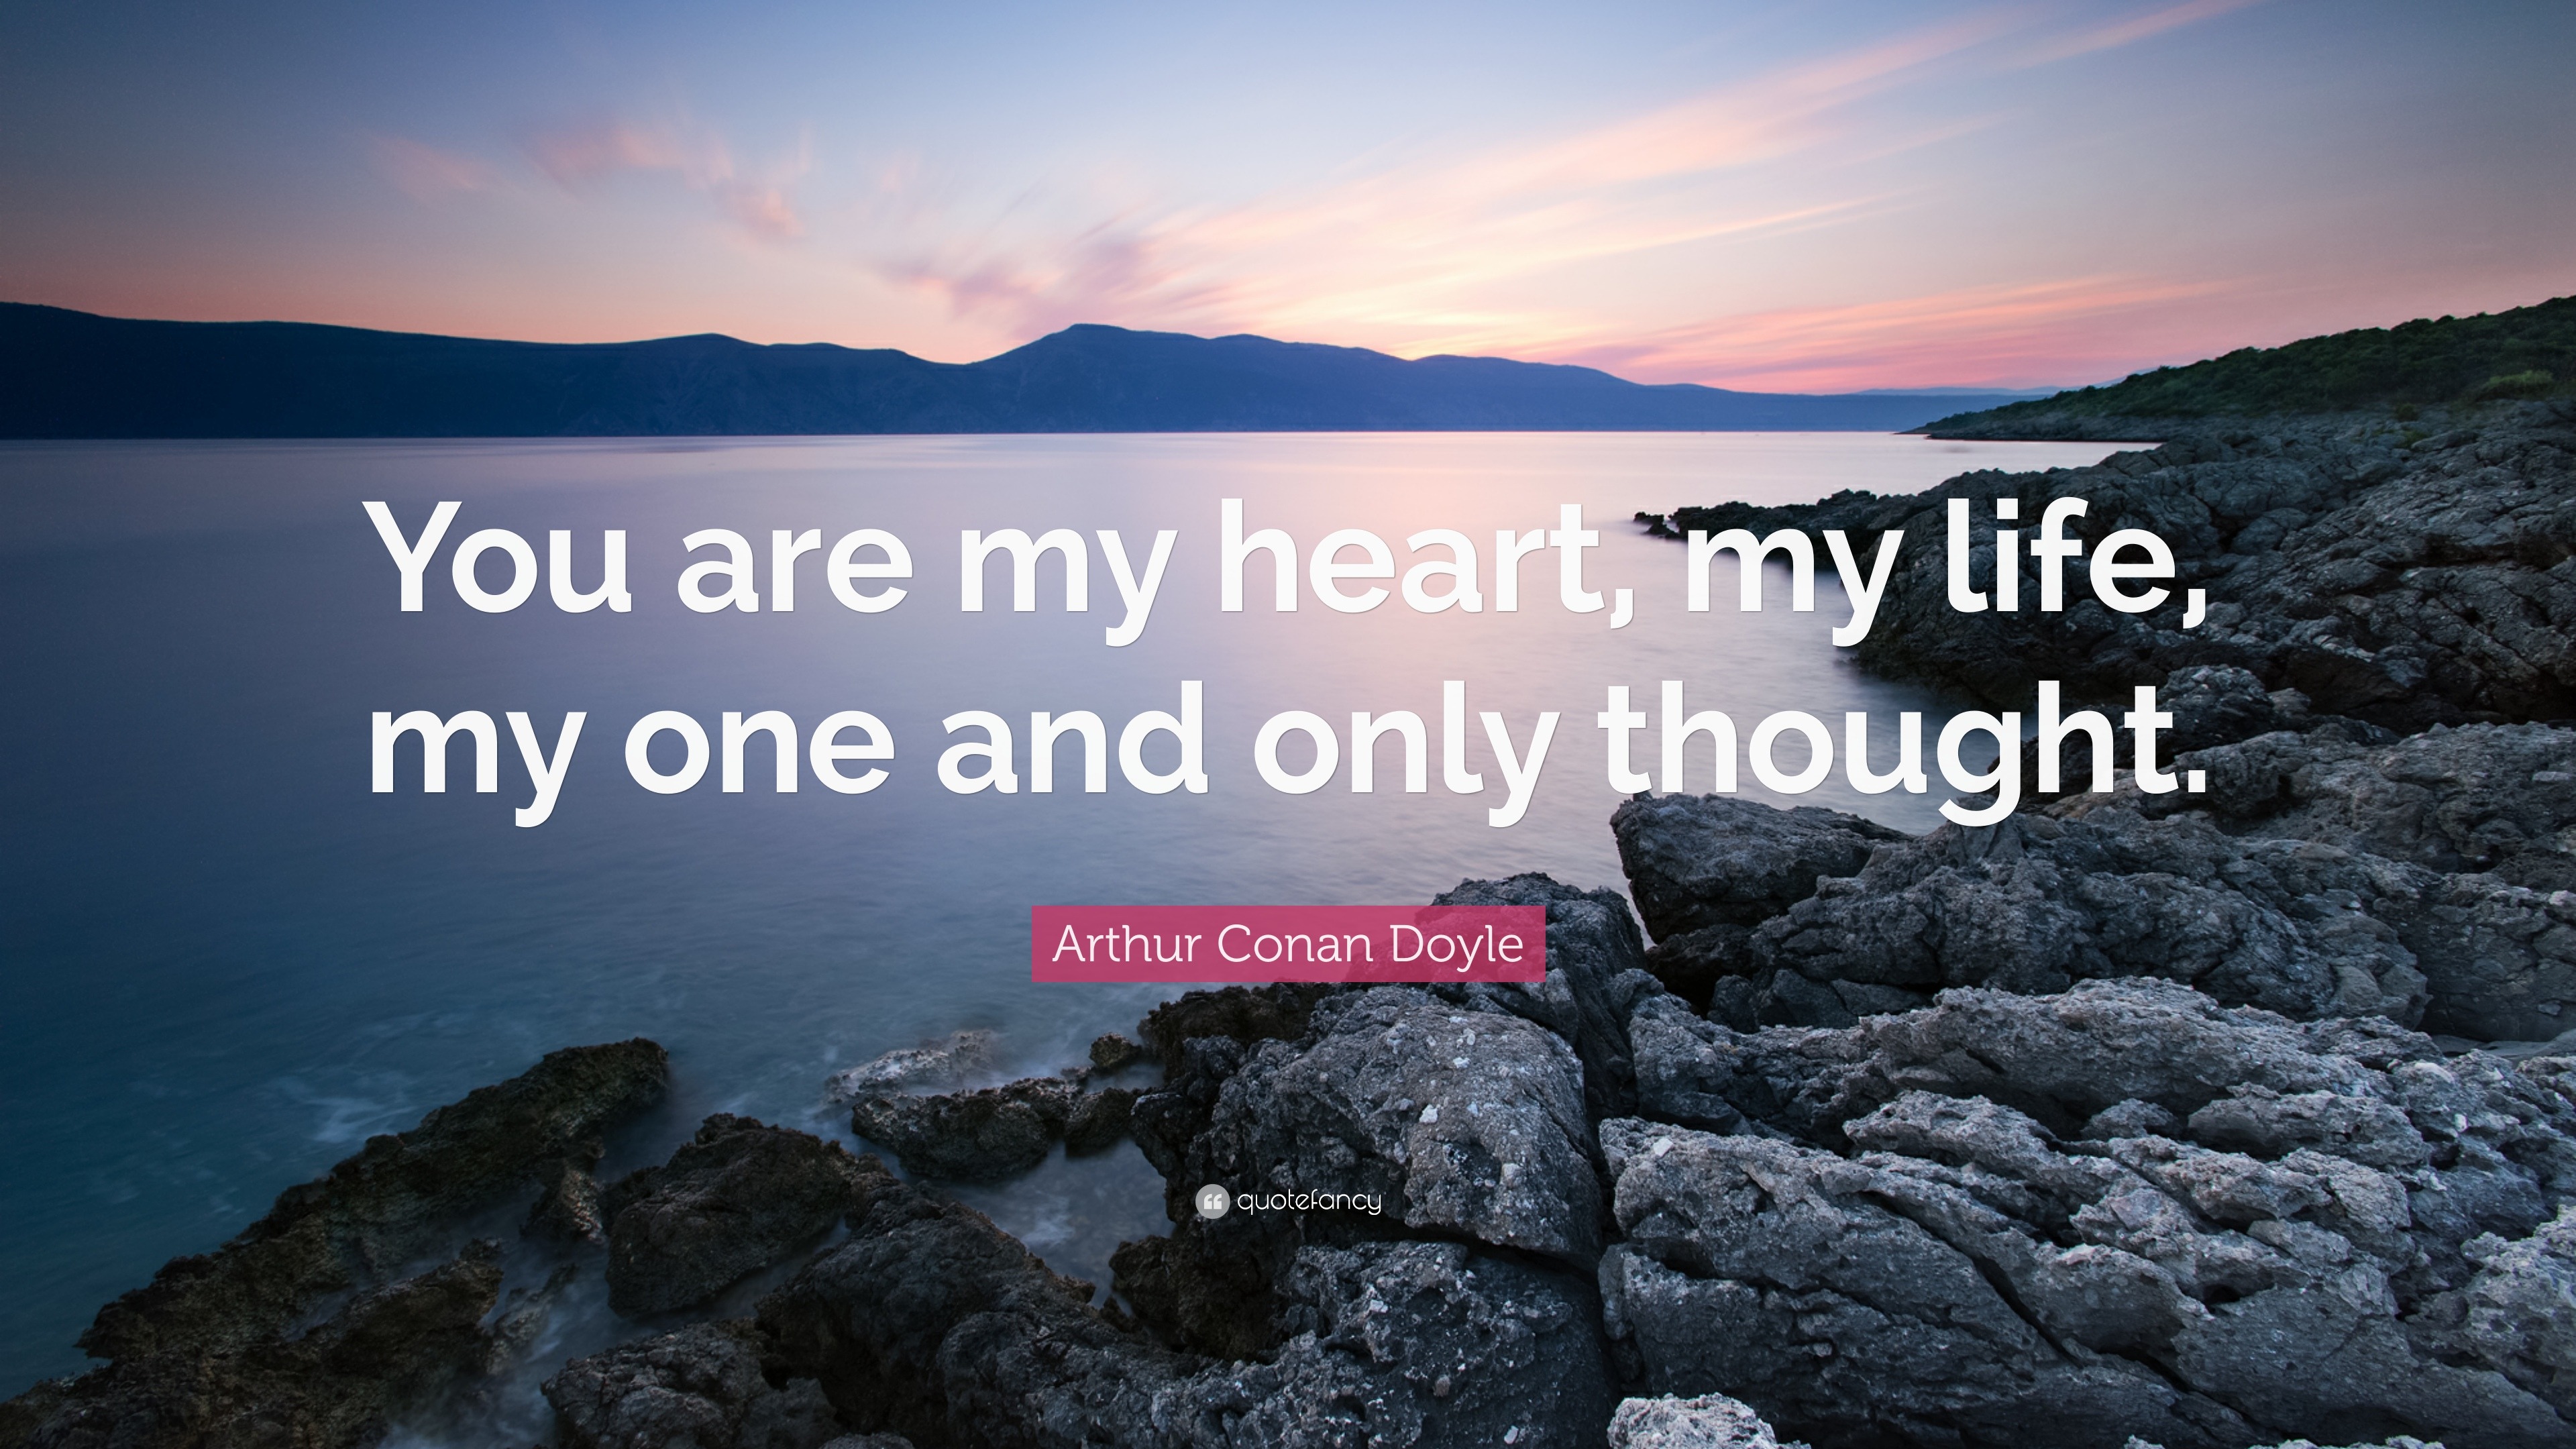 Arthur Conan Doyle Quote “You are my heart my life my one